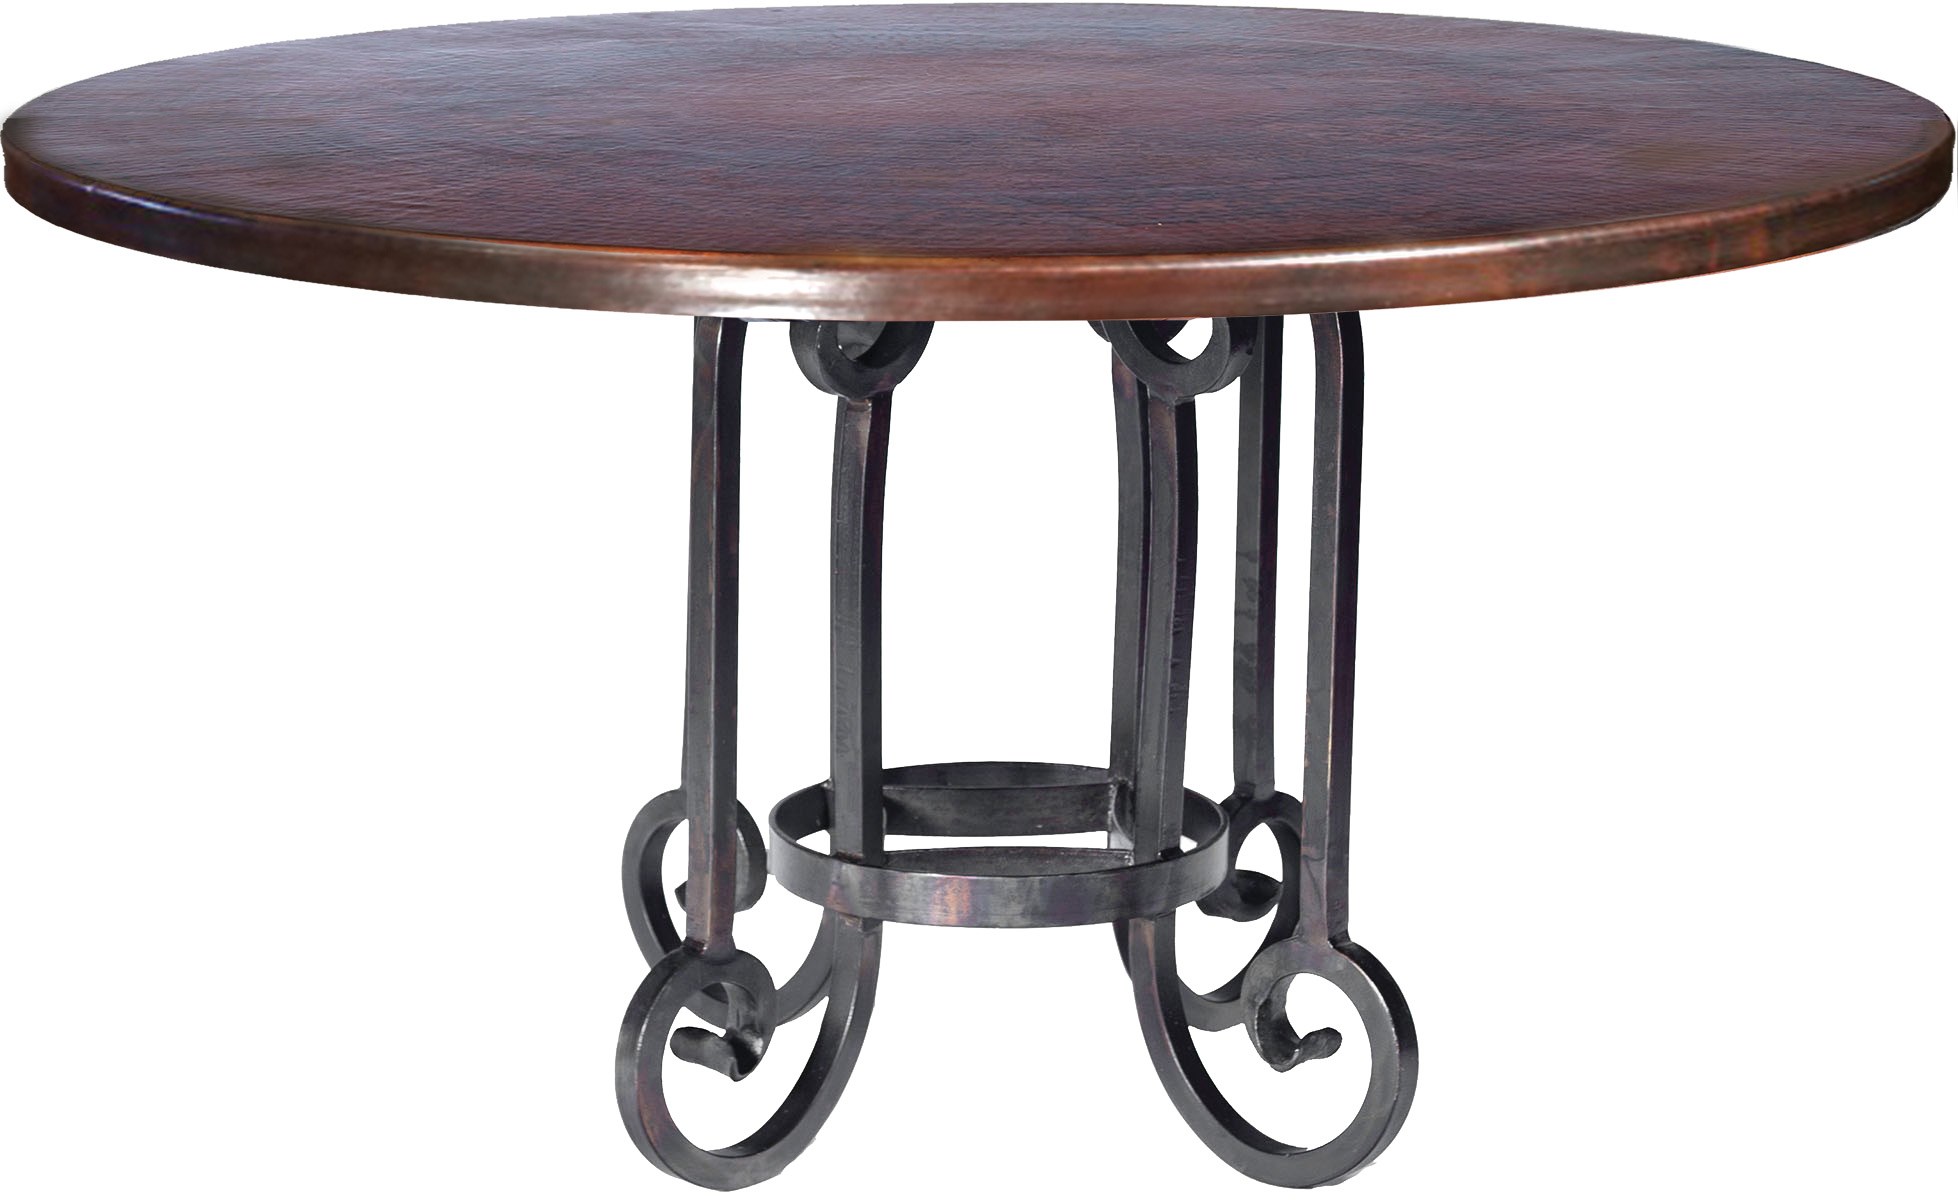 Curled Leg Round Dining Table With 54 Round Dark Brown Hammered Copper Top Boulevard Urban Living